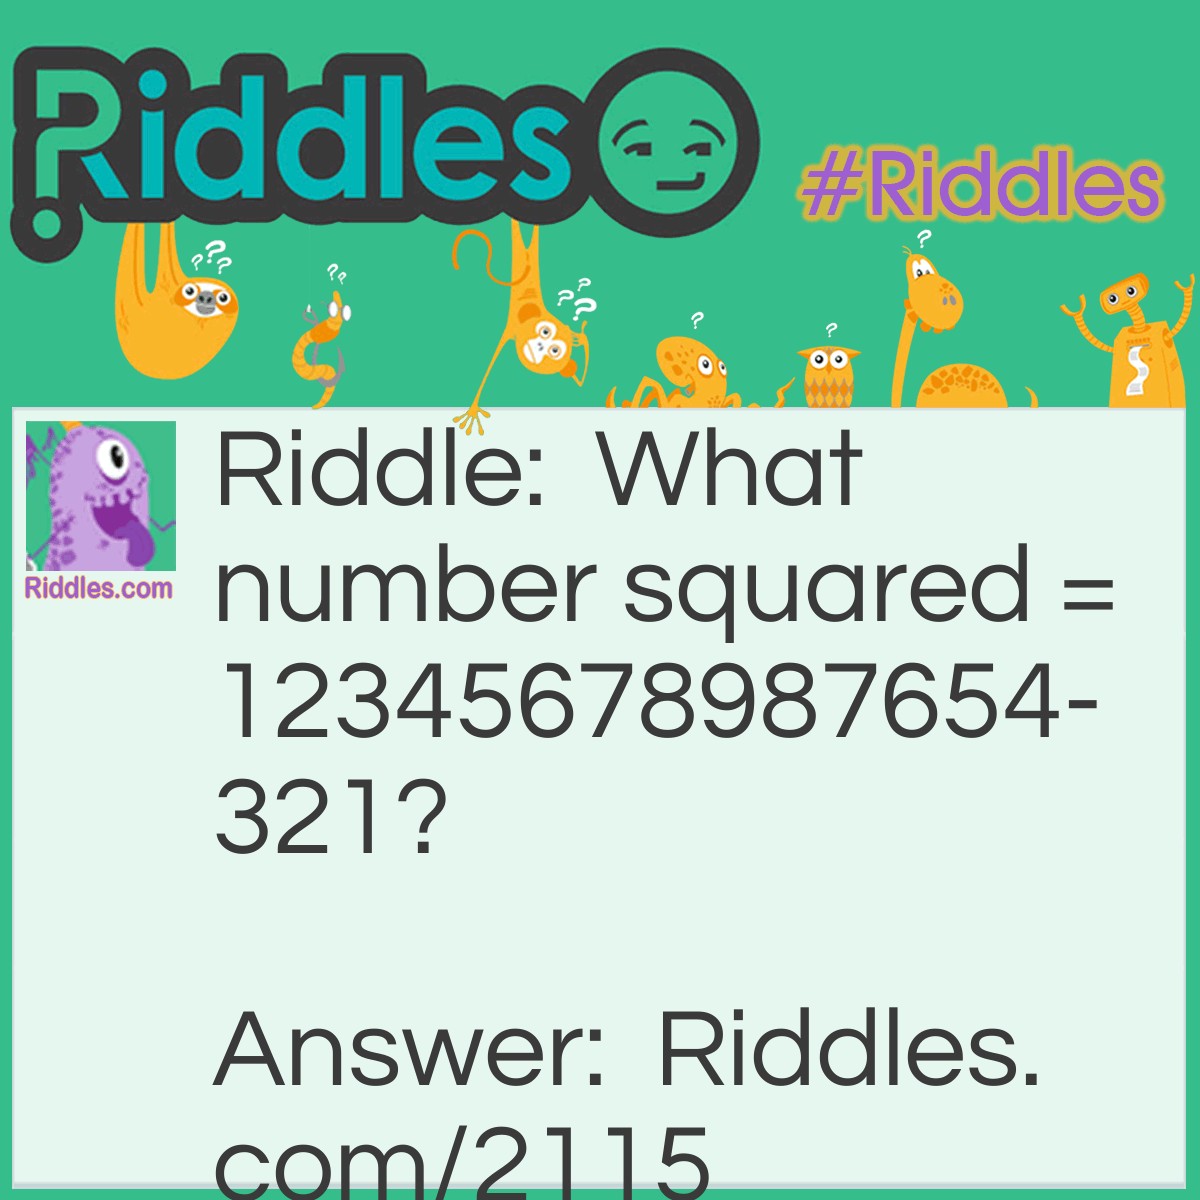 Riddle: What number squared = 12345678987654321?
  Answer: 111,111,111